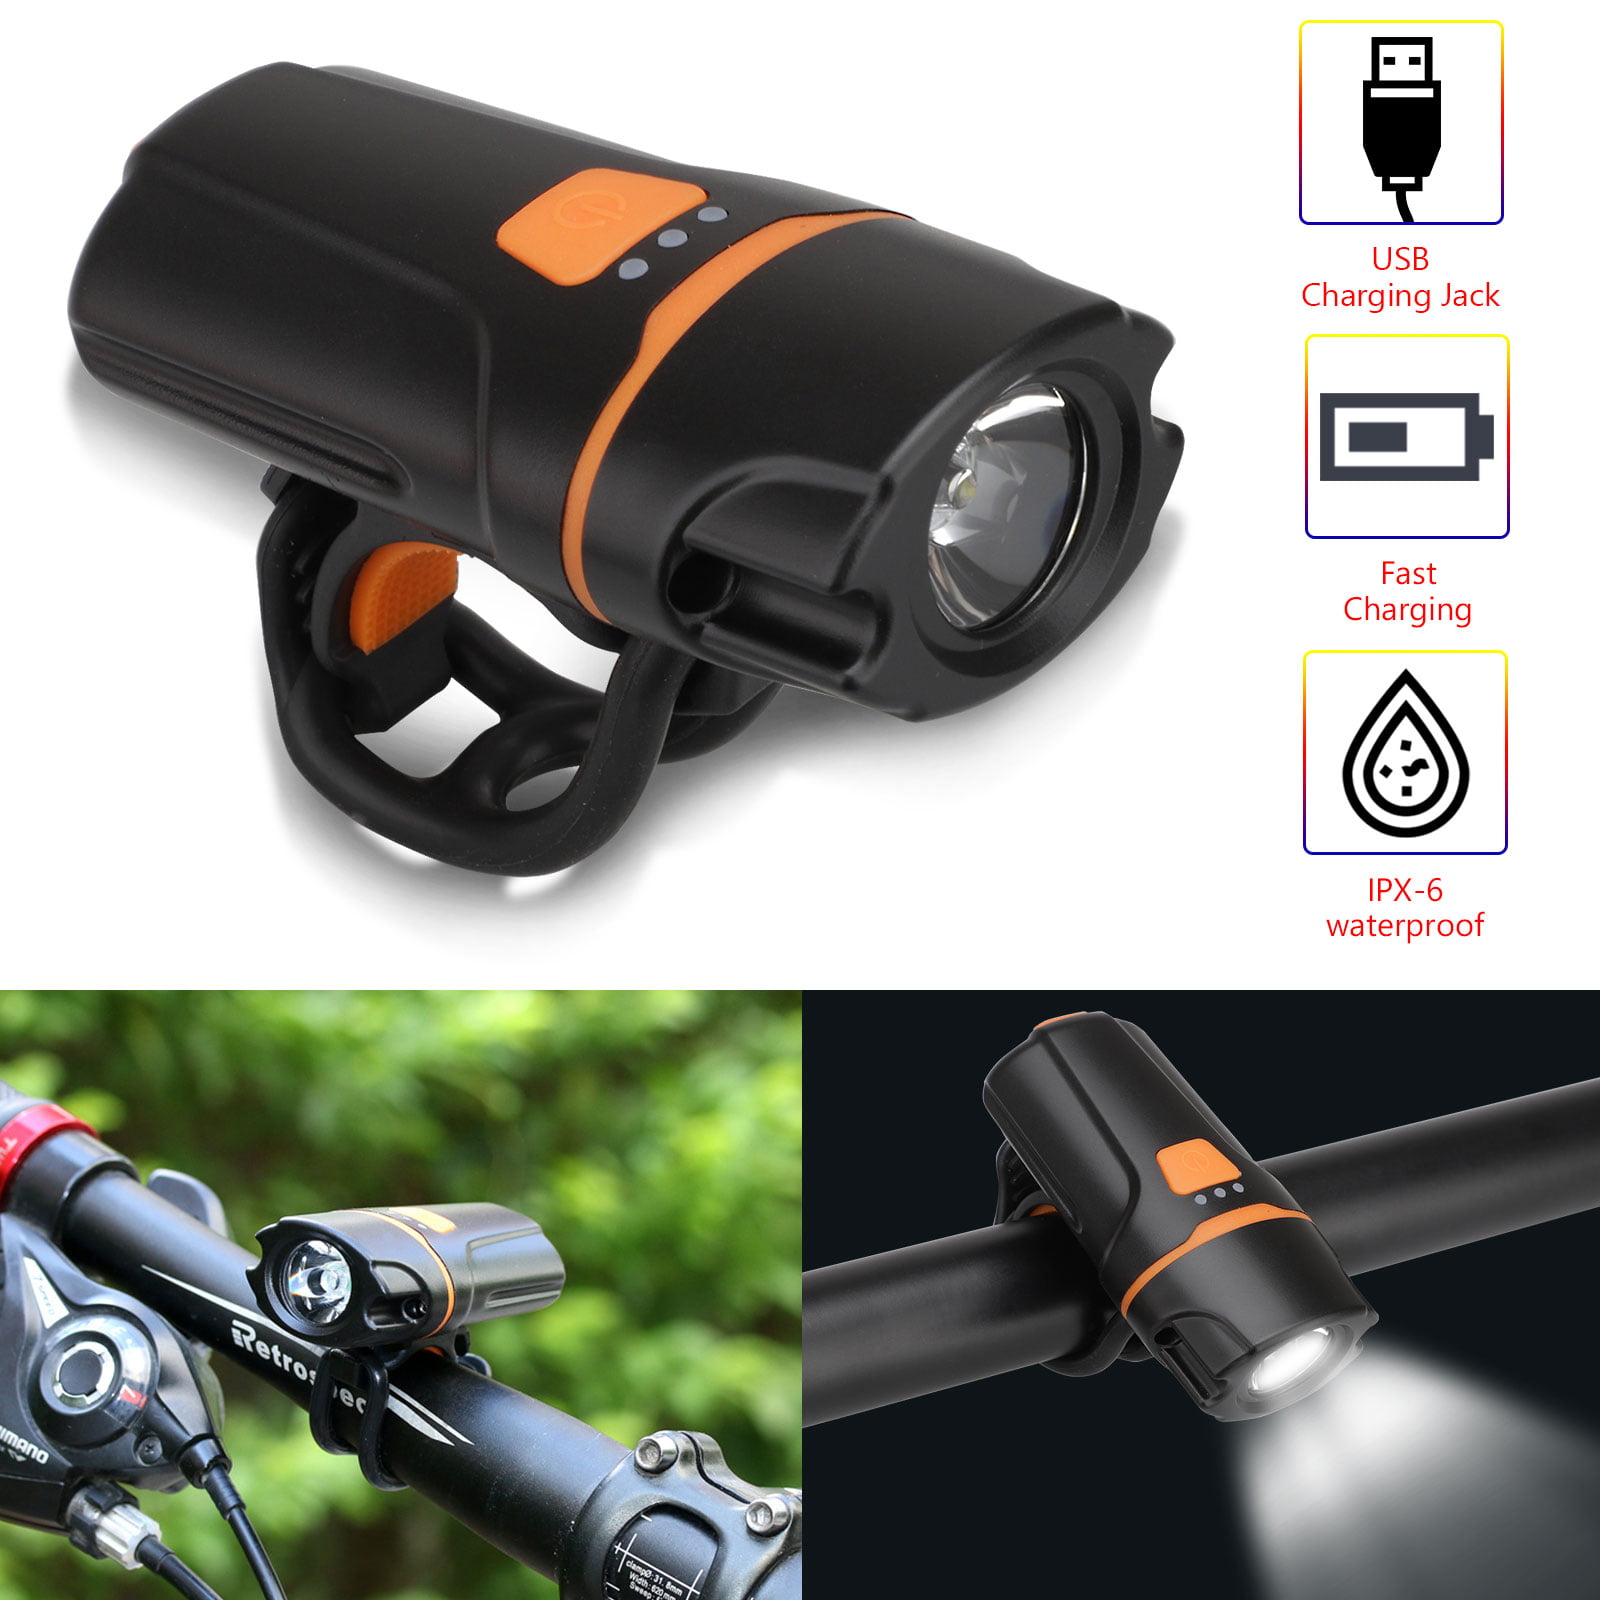 Rechargeable USB LED Bicycle Bright Bike Front Headlight Lamp Bulb Waterproof